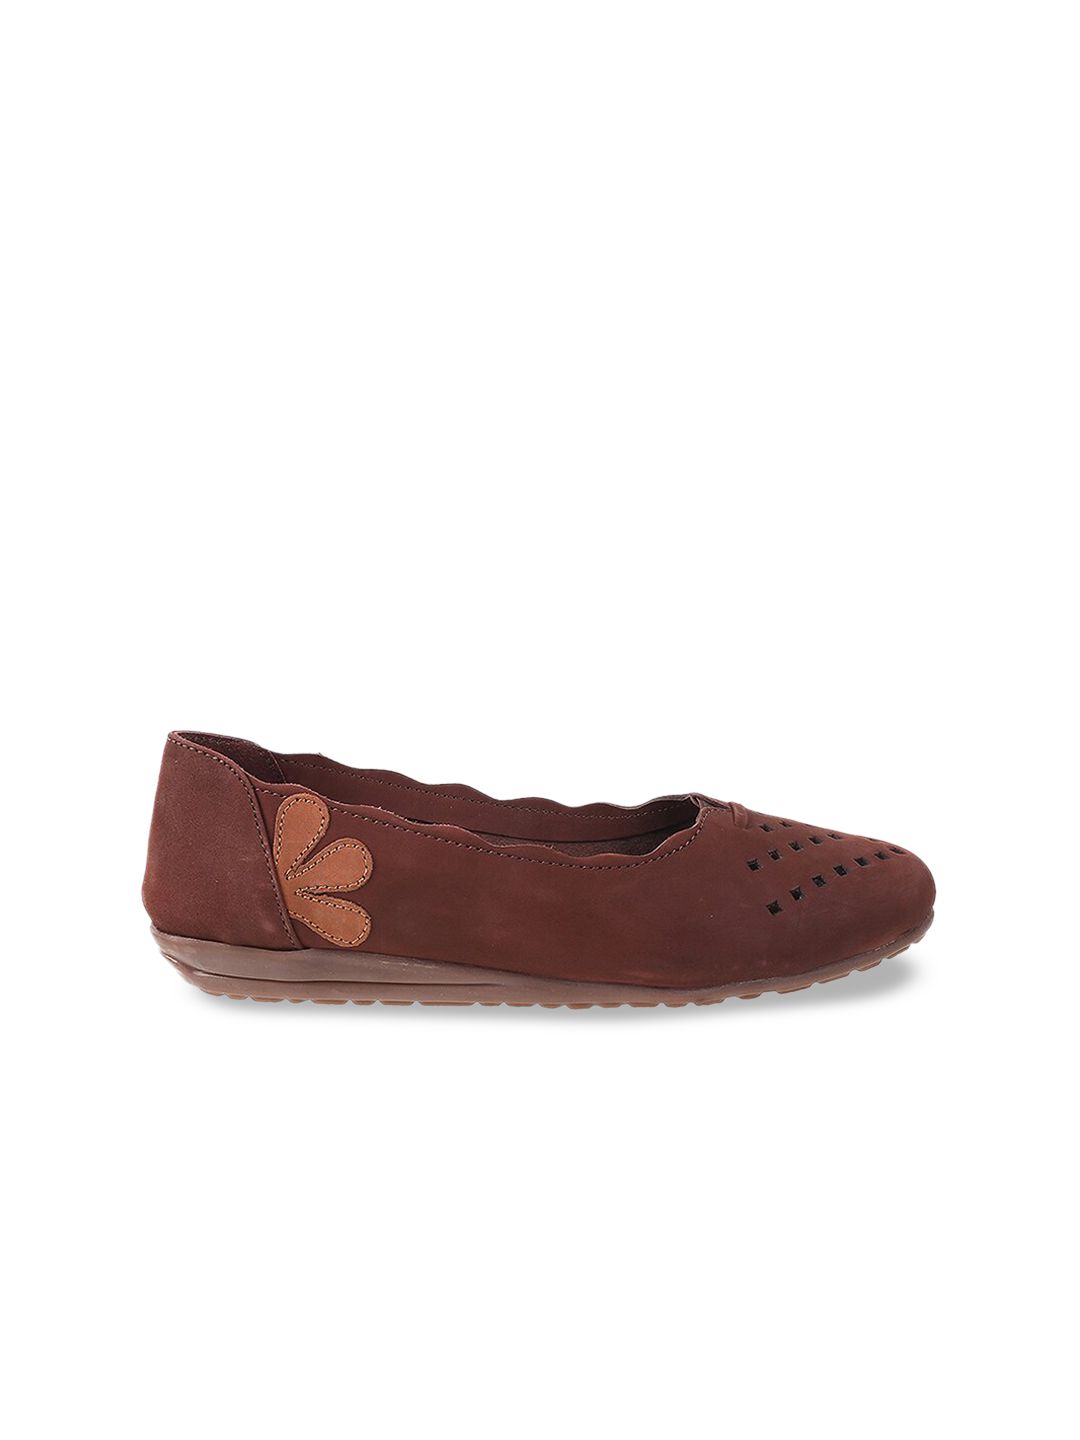 Mochi Women Brown Ballerinas with Laser Cuts Flats Price in India